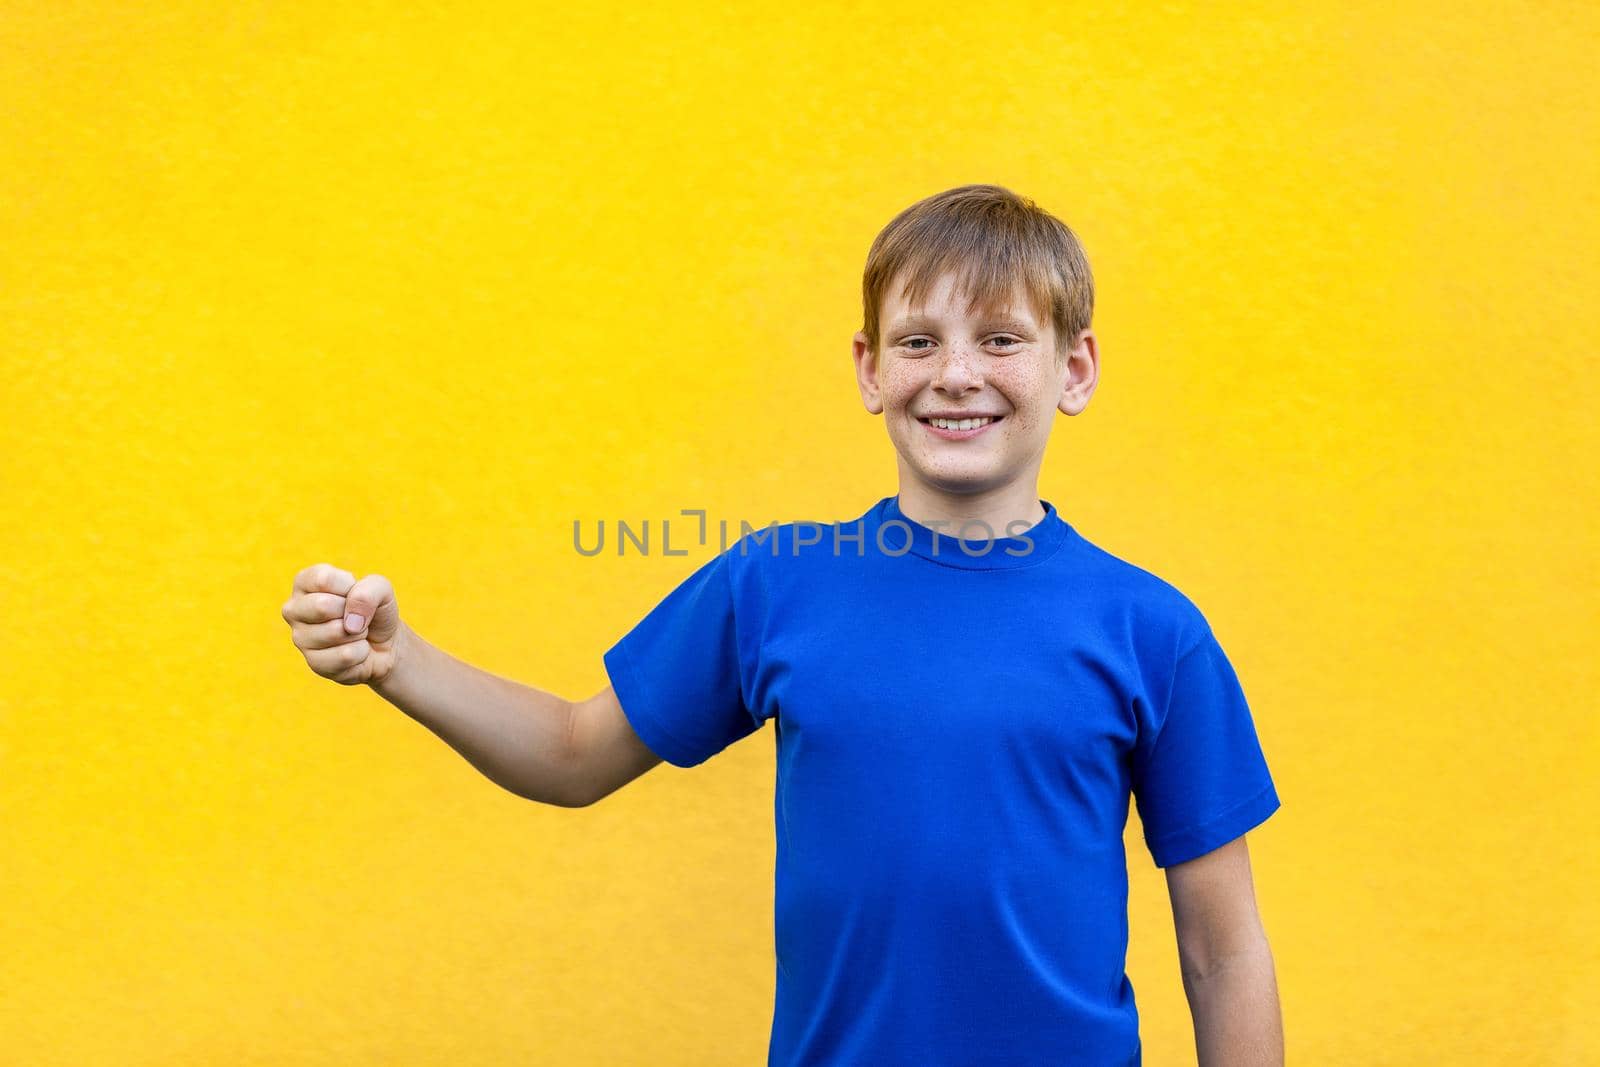 Happiness freckled boy holding imaginary object, looking at camera with toothy smile. Studio shot, yellow background